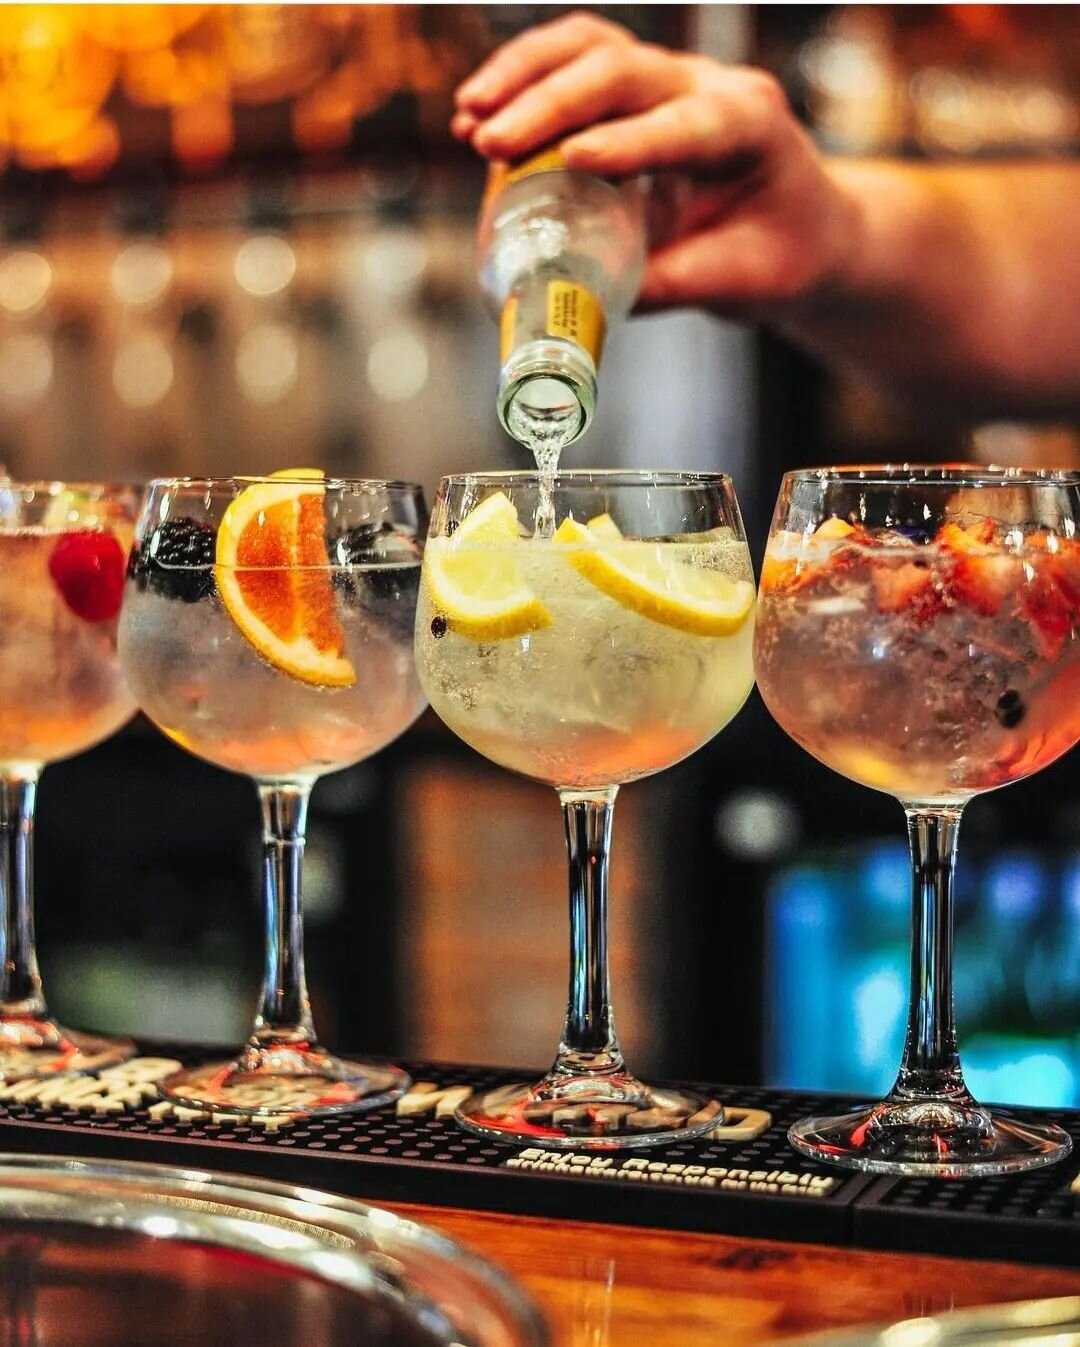 Make sure to pay us a visit tonight it's FIZZ FRIDAY 🥂

We also have plenty of lager, wine, spirits, and Soft drinks to keep you going all night 😘

#horsforth #themaltbrewhouse #fridaynightdrinks #fizzfriday